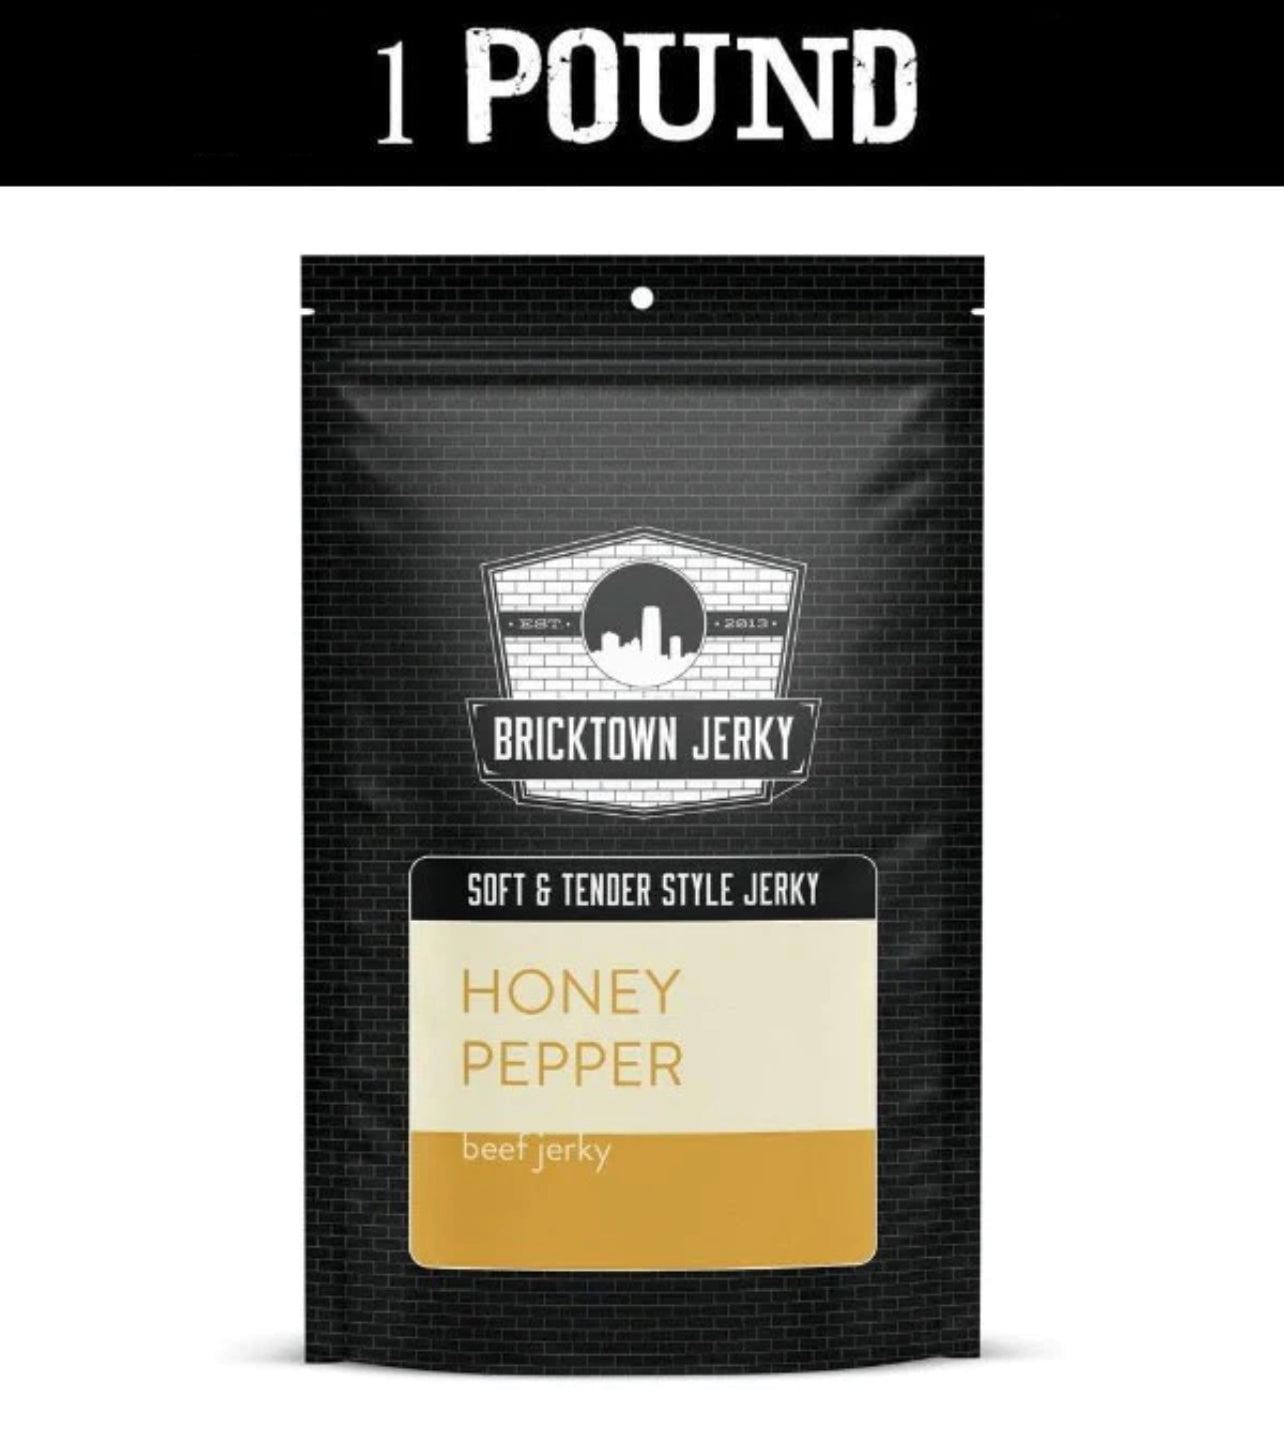 Soft and Tender Style Beef Jerky - Honey Pepper - 1 Pound by Bricktown Jerky